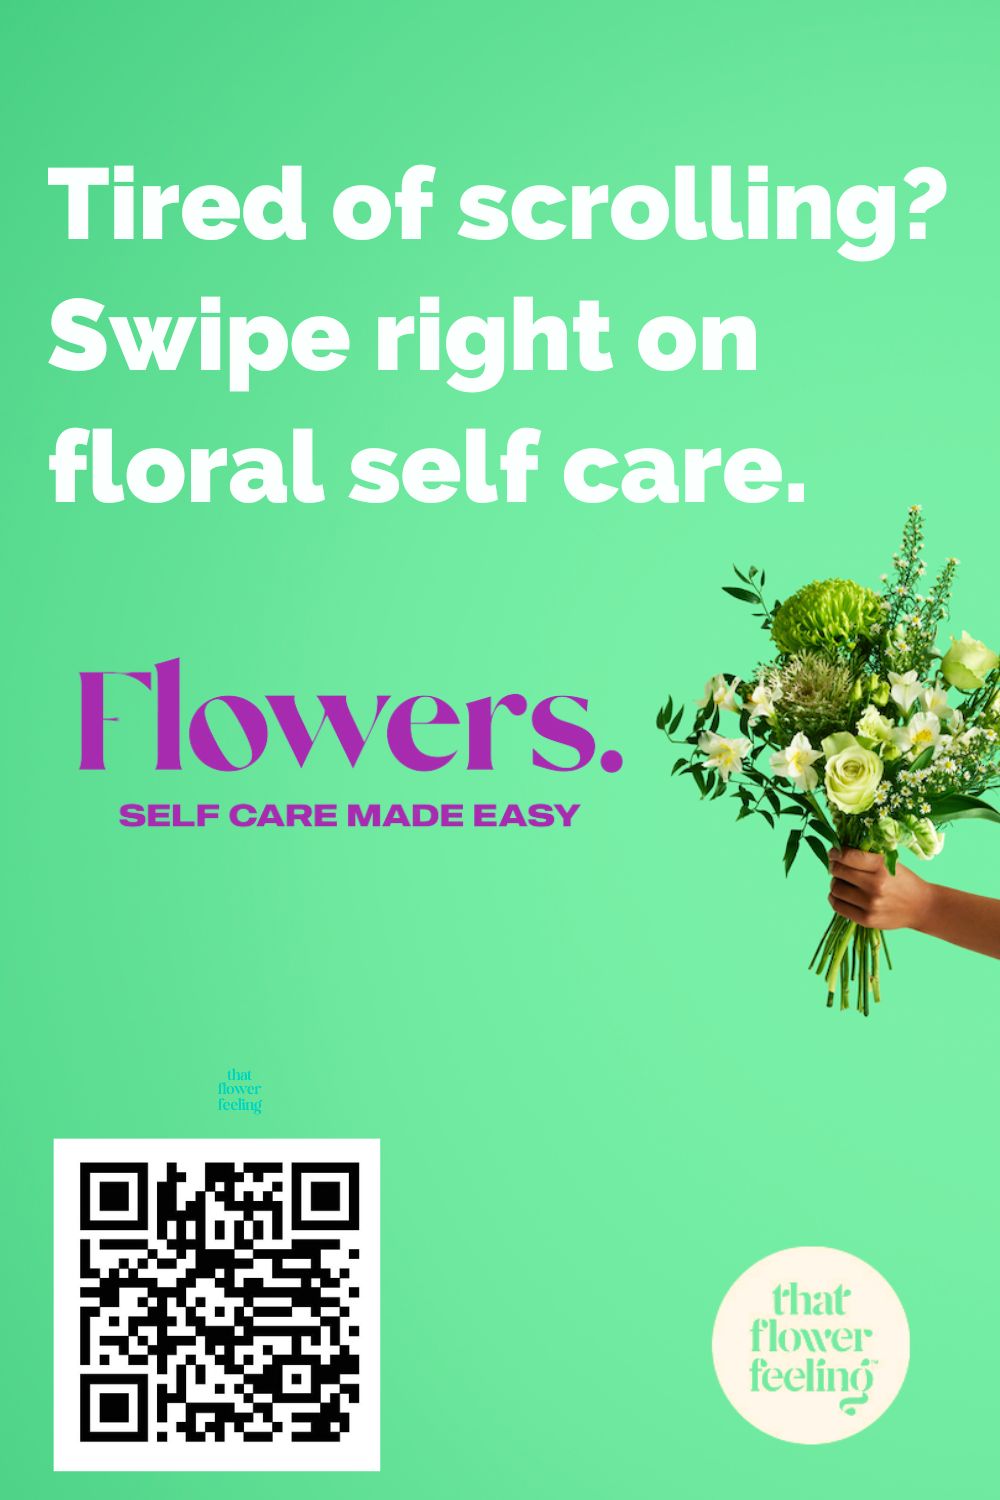 Swipe right on floral self care